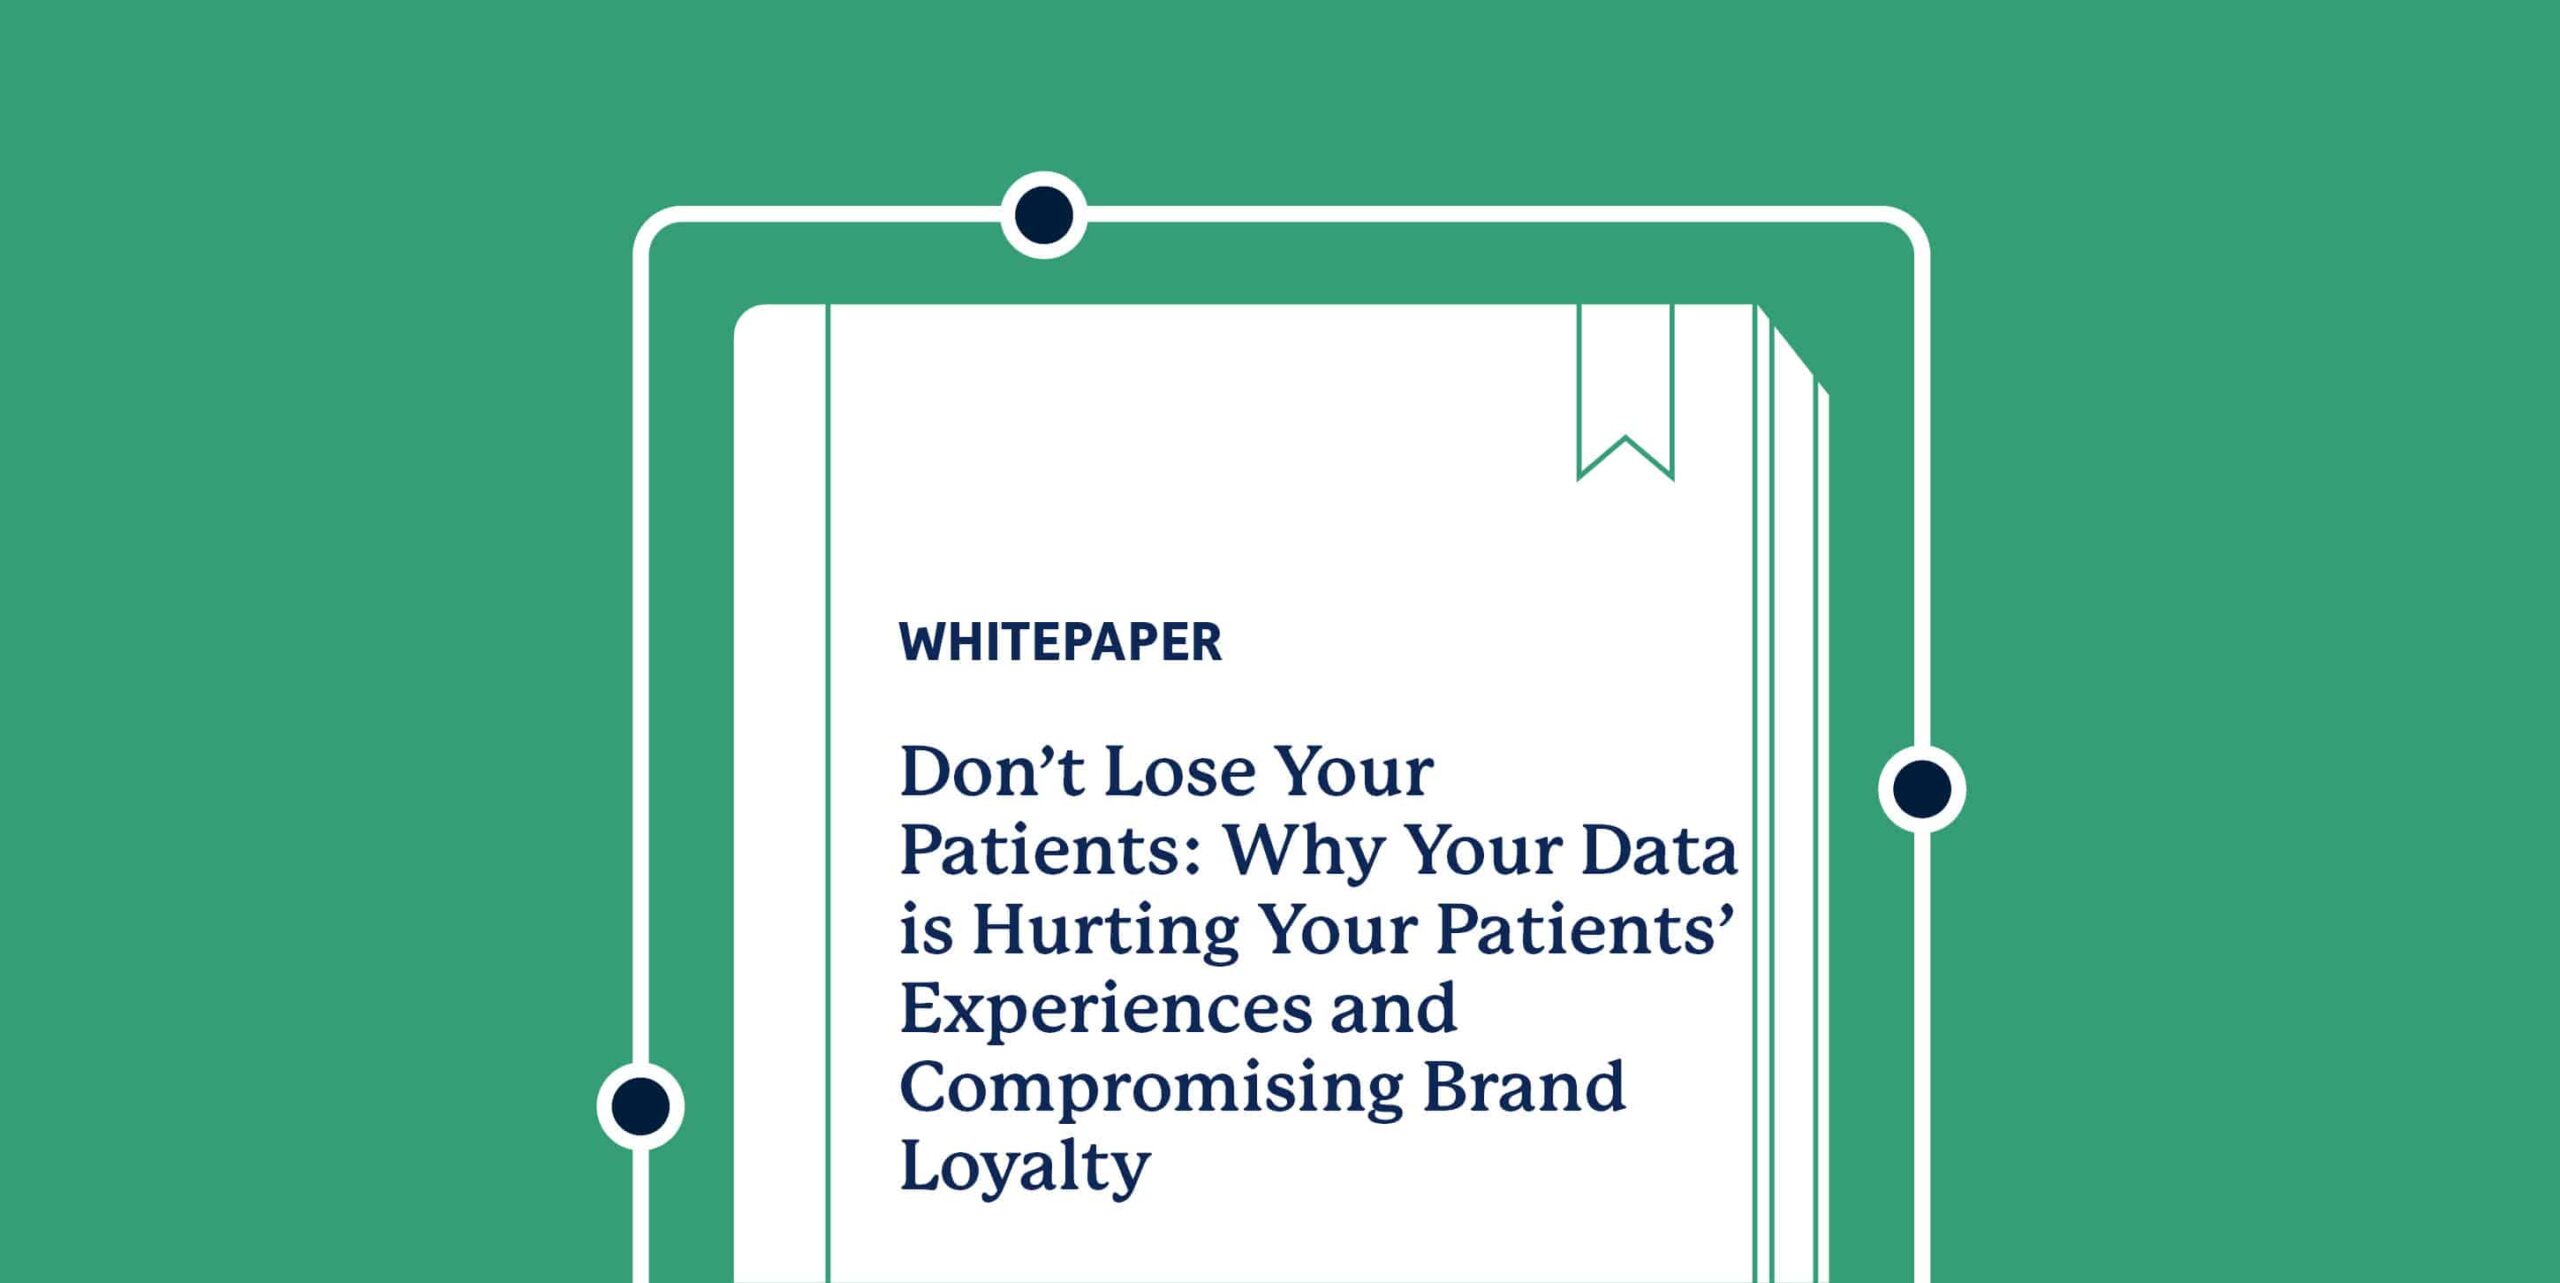 Don’t Lose Your Patients: Data and the Patient Experience